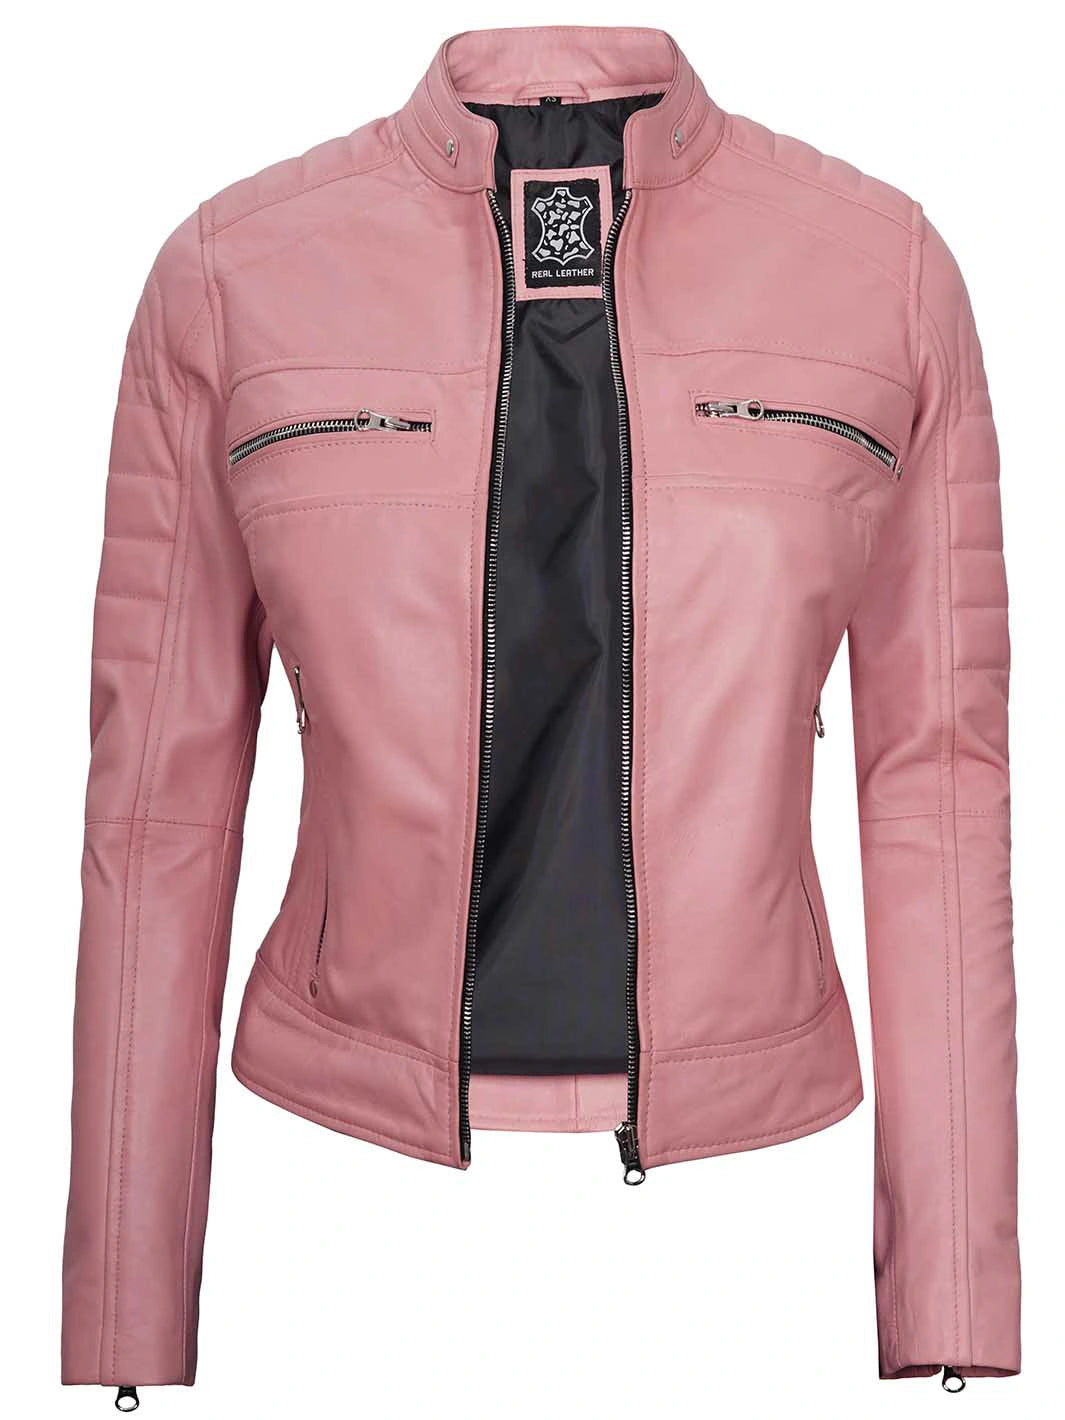 Womens pink real leather jacket